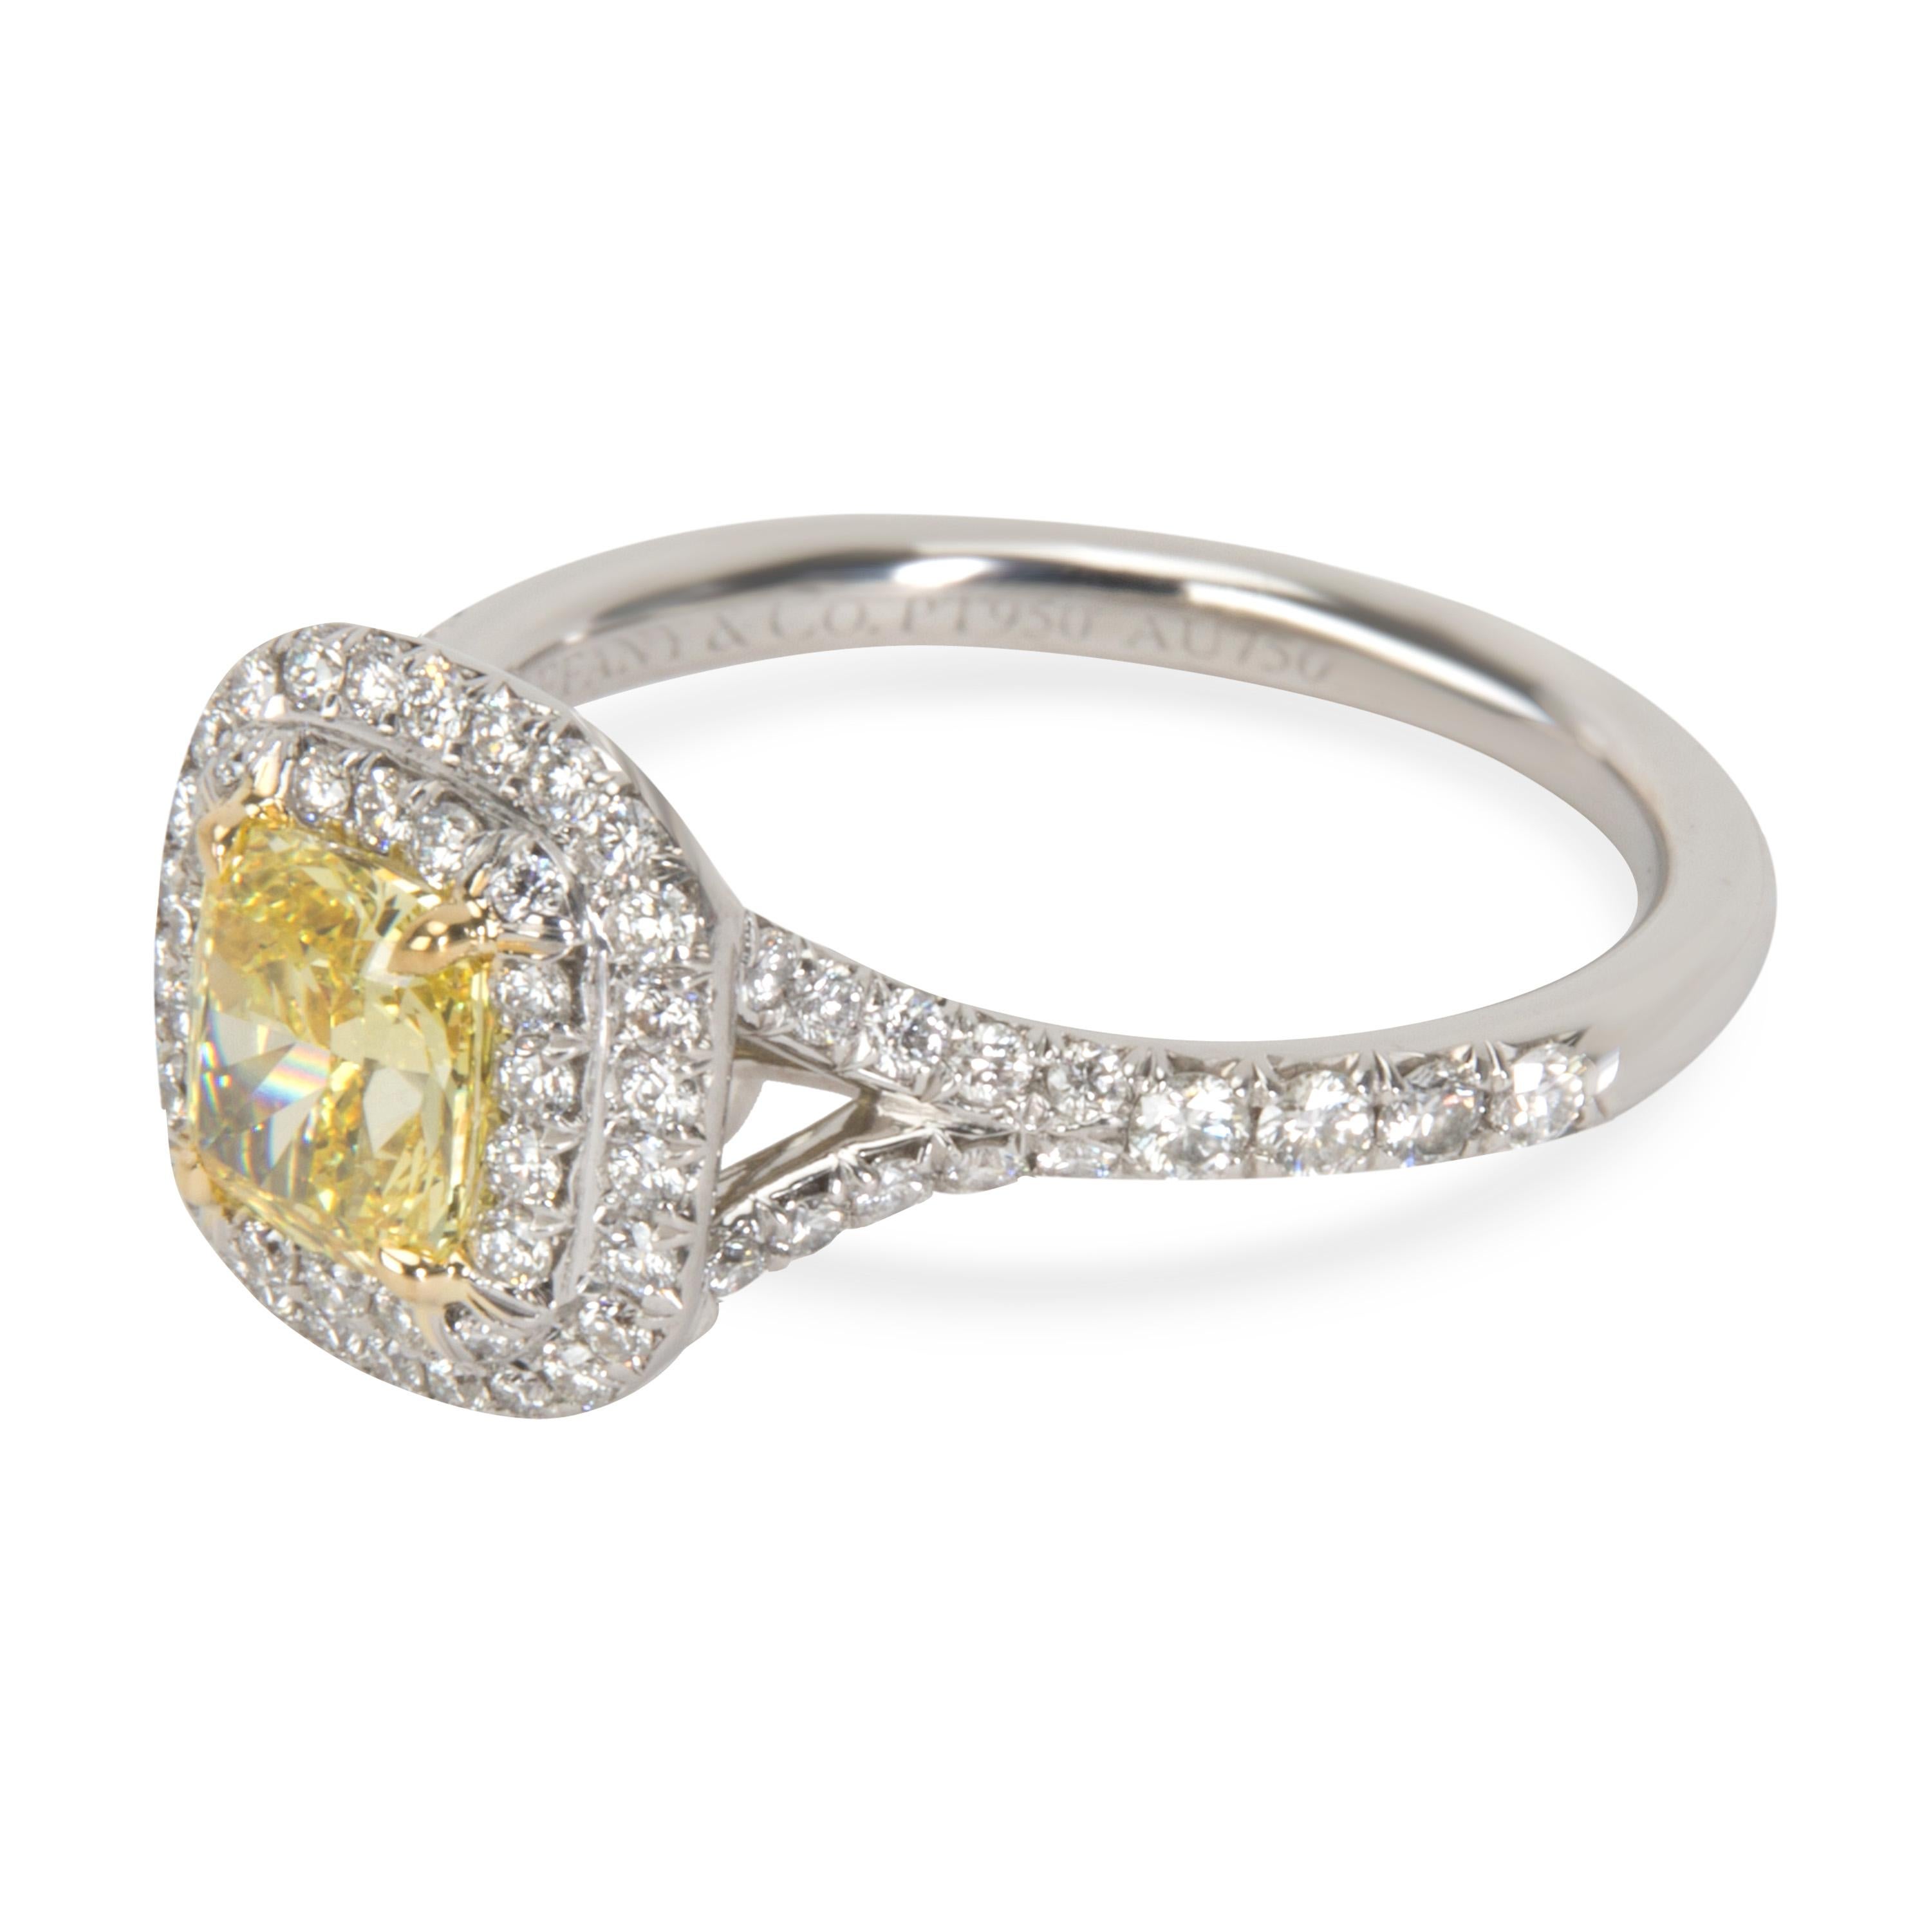 Cushion Cut Tiffany & Co. Fancy Yellow Double Halo Diamond Engagement Ring in Platinum